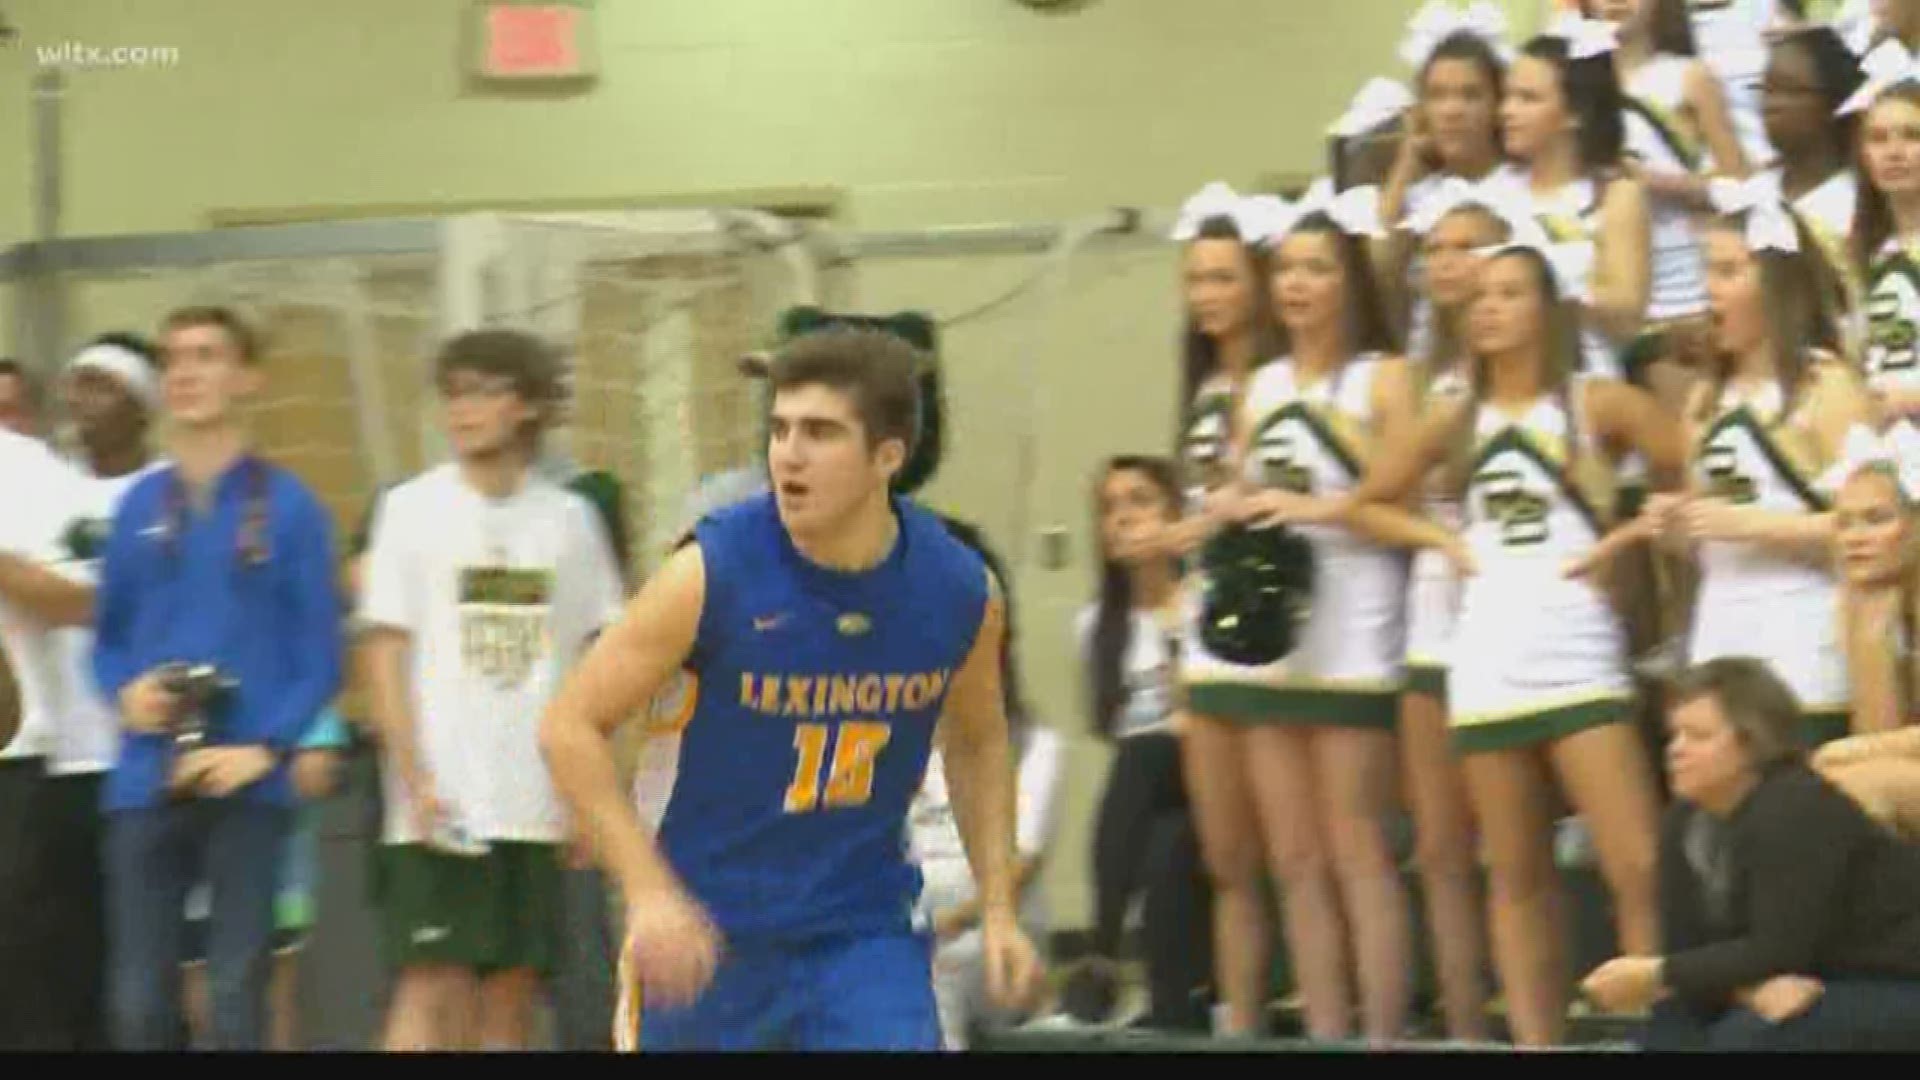 Highlights and reaction from Lexington's dramatic 58-56 win at River Bluff.